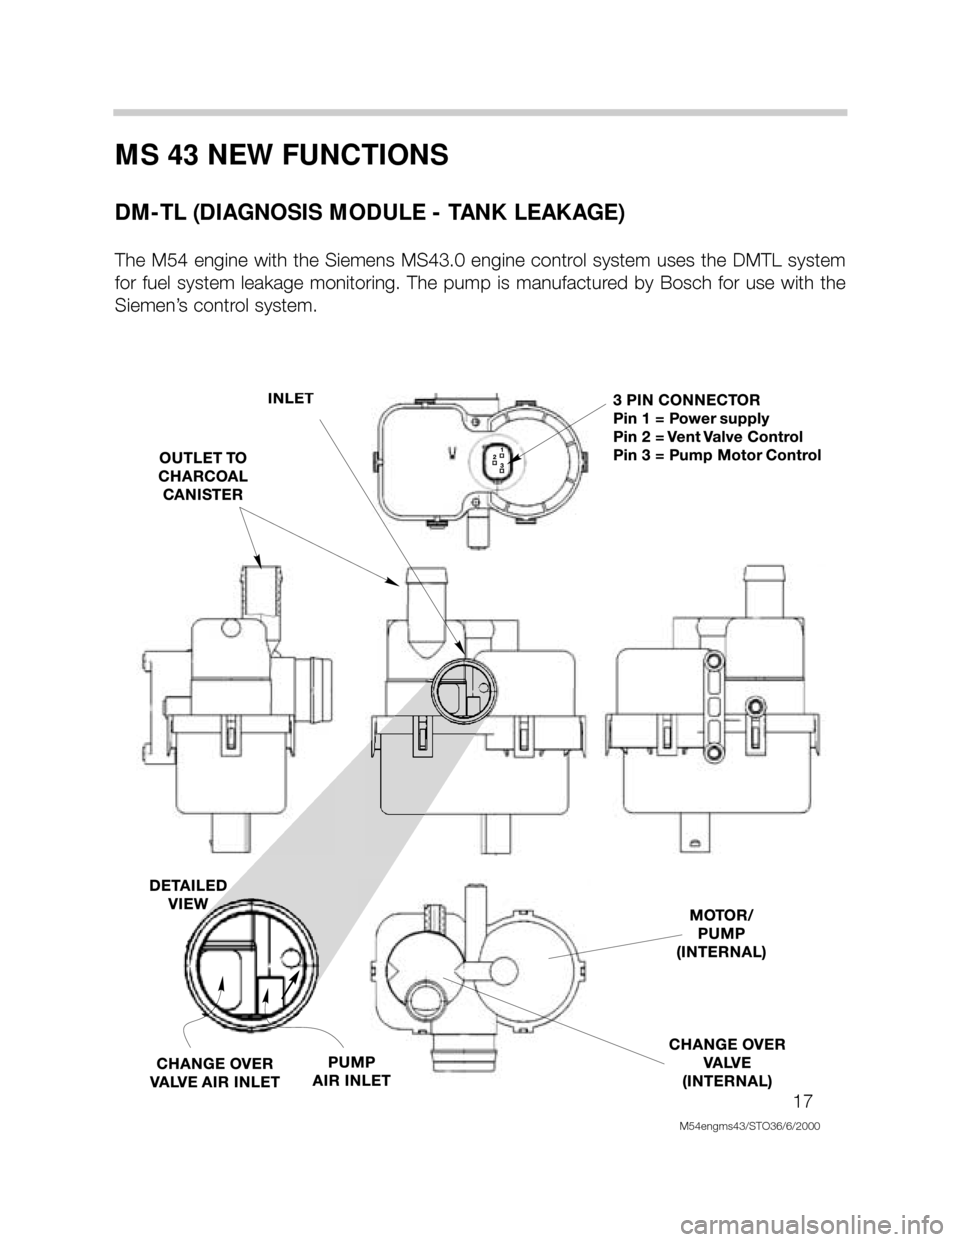 BMW X5 2005 E53 M54 Engine Workshop Manual 17
M54engms43/STO36/6/2000
MS 43 NEW FUNCTIONS
DM-TL (DIAGNOSIS MODULE - TANK LEAKAGE)
The  M54  engine  with  the  Siemens  MS43.0  engine  control  system  uses  the  DMTL  system
for  fuel  system 